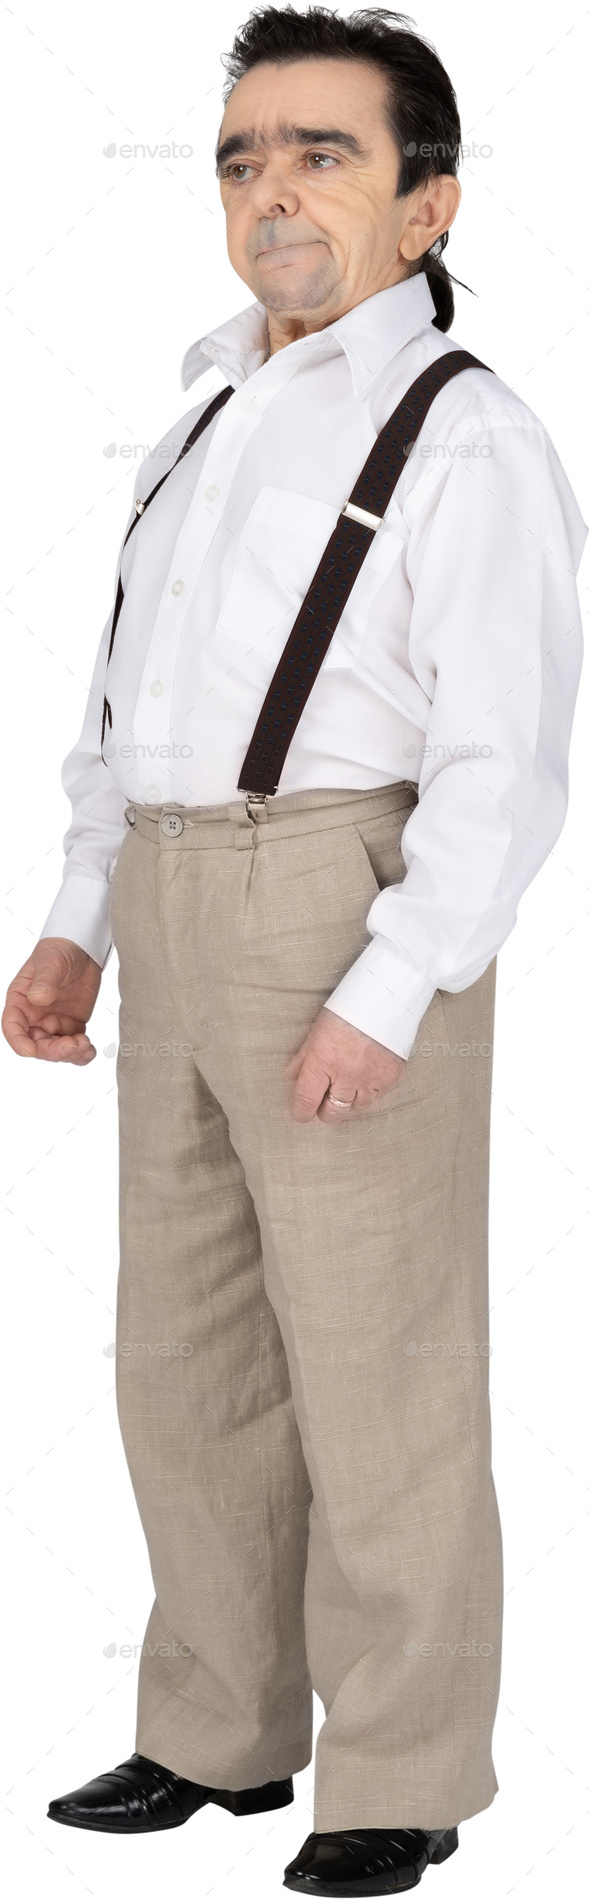 a man in a white shirt and brown pants with suspenders Stock Photo by Icons8